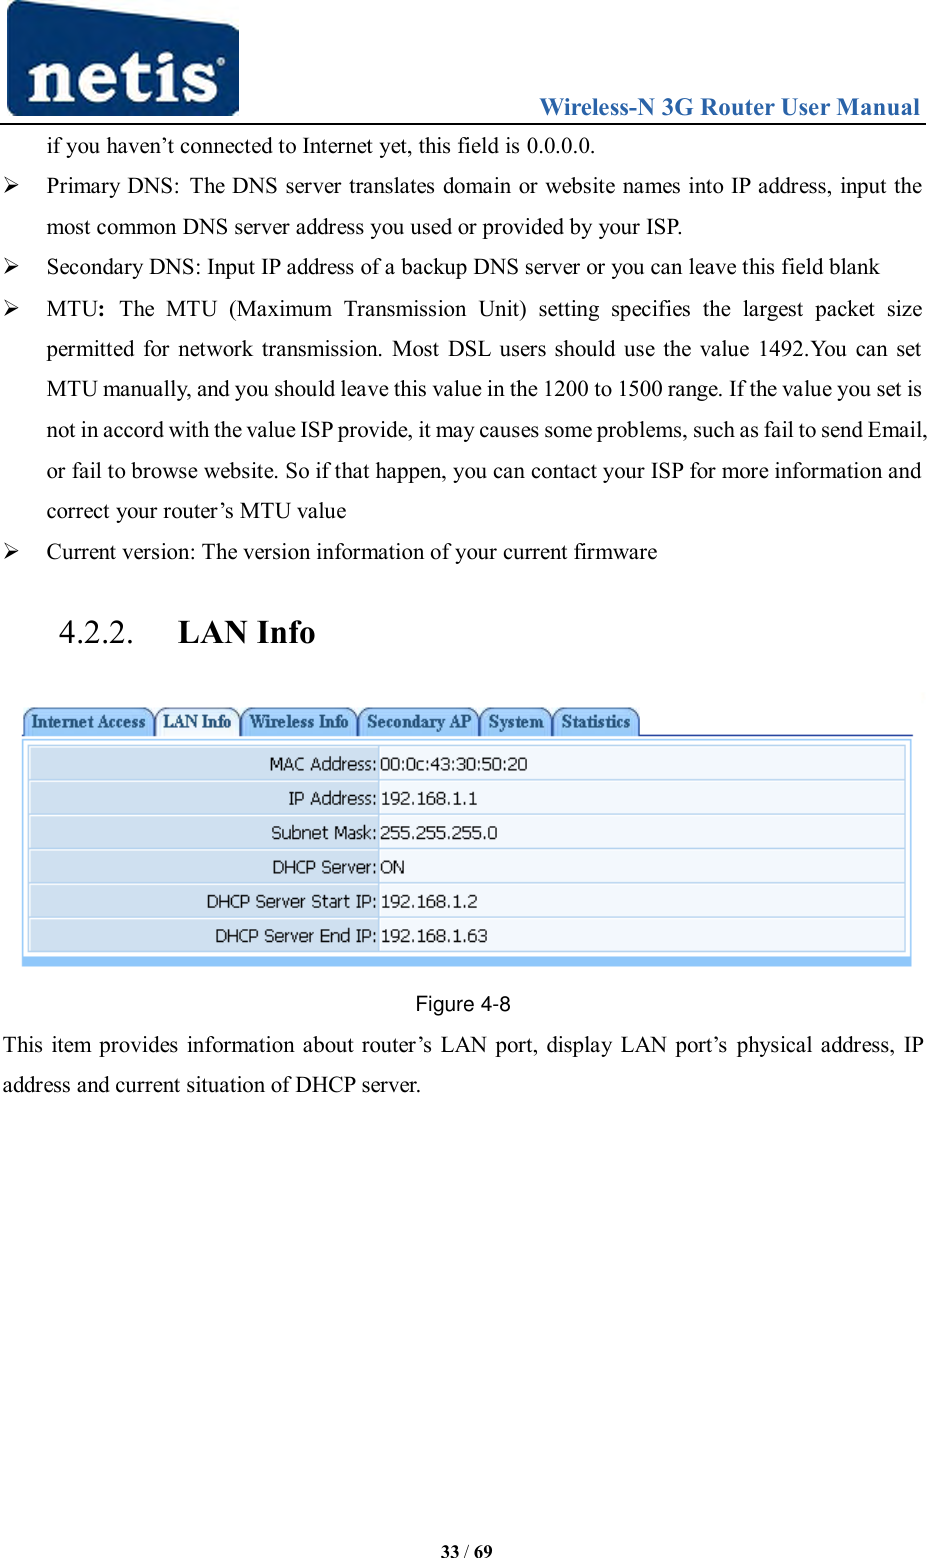                                 Wireless-N 3G Router User Manual  33 / 69 if you haven‟t connected to Internet yet, this field is 0.0.0.0.  Primary DNS:  The DNS server translates domain or website names into IP address, input the most common DNS server address you used or provided by your ISP.  Secondary DNS: Input IP address of a backup DNS server or you can leave this field blank  MTU:  The  MTU  (Maximum  Transmission  Unit)  setting  specifies  the  largest  packet  size permitted for network transmission. Most DSL users should use the value 1492.You can set MTU manually, and you should leave this value in the 1200 to 1500 range. If the value you set is not in accord with the value ISP provide, it may causes some problems, such as fail to send Email, or fail to browse website. So if that happen, you can contact your ISP for more information and correct your router‟s MTU value  Current version: The version information of your current firmware 4.2.2. LAN Info  Figure 4-8 This item  provides information about router‟s  LAN  port, display LAN port‟s  physical address, IP address and current situation of DHCP server. 